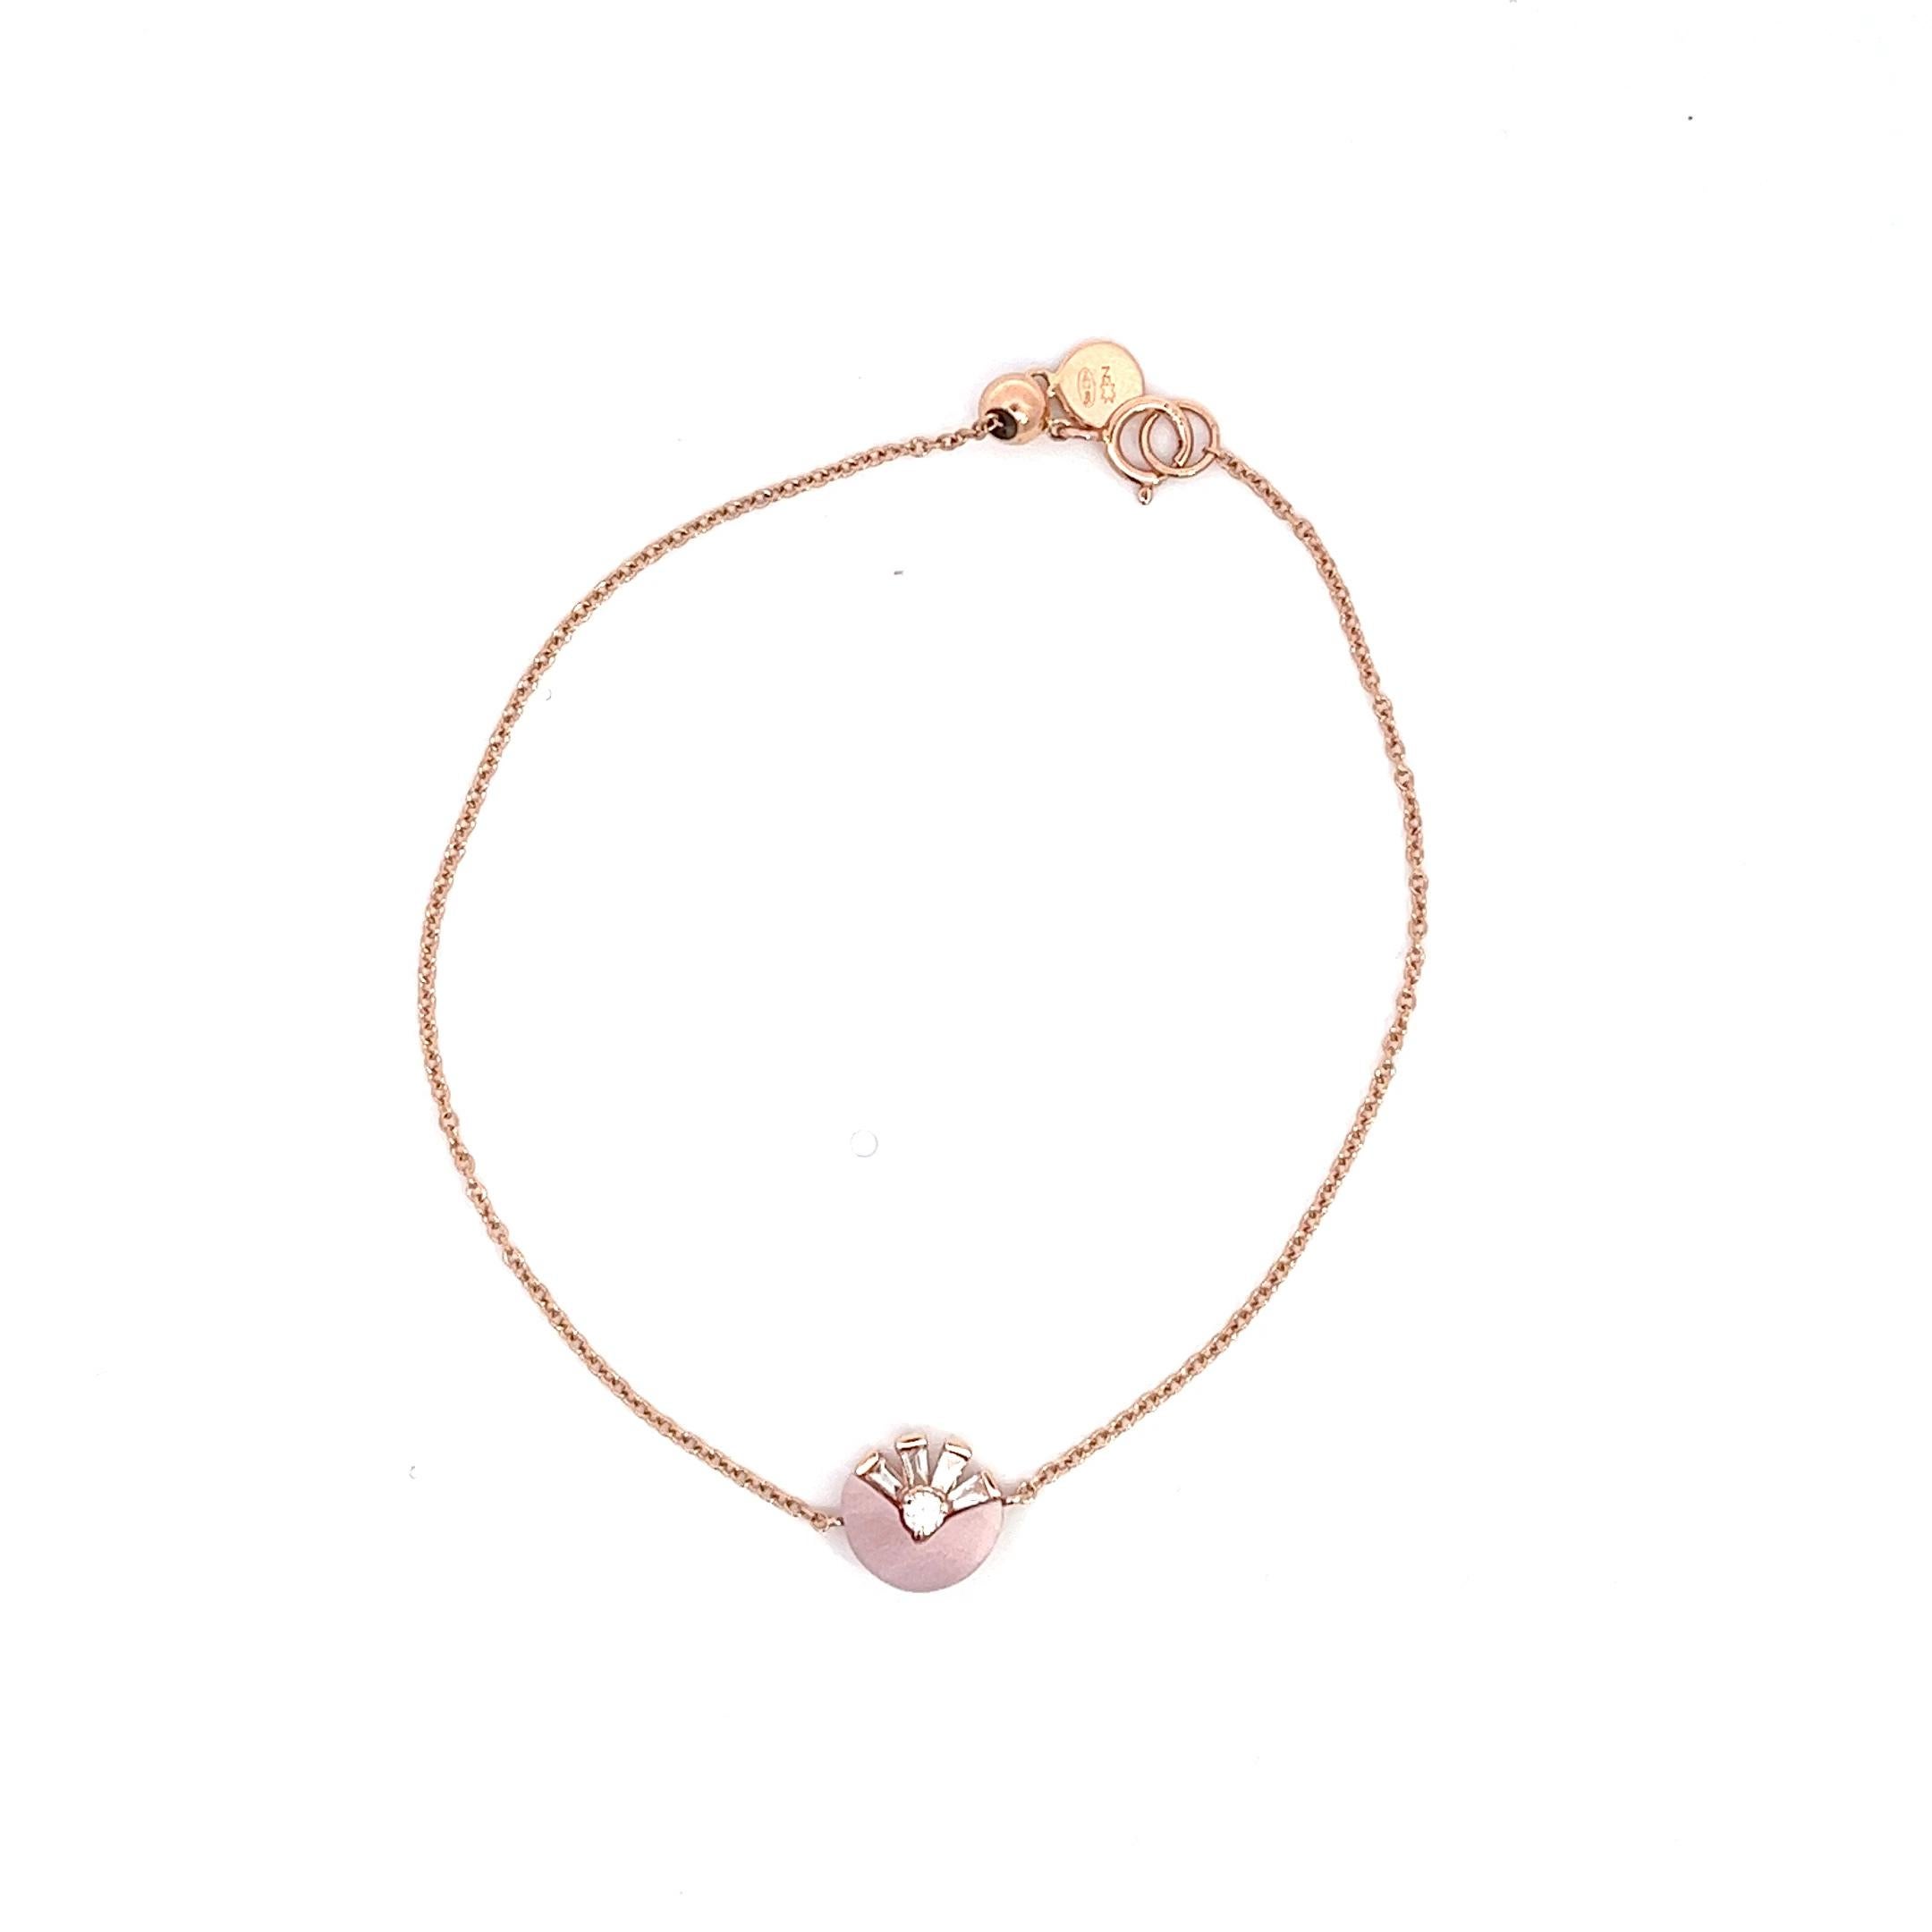 14K Rose Gold Bracelet

Diamonds 1 - 0.043cts

TP 4 - 0.086cts

Pink Mother of Pearl 1 - 0.69cts

Weight 1.526g

SKU 043048-001


With a heritage of ancient fine Swiss jewelry traditions, NATKINA is a Geneva based jewellery brand, which creates